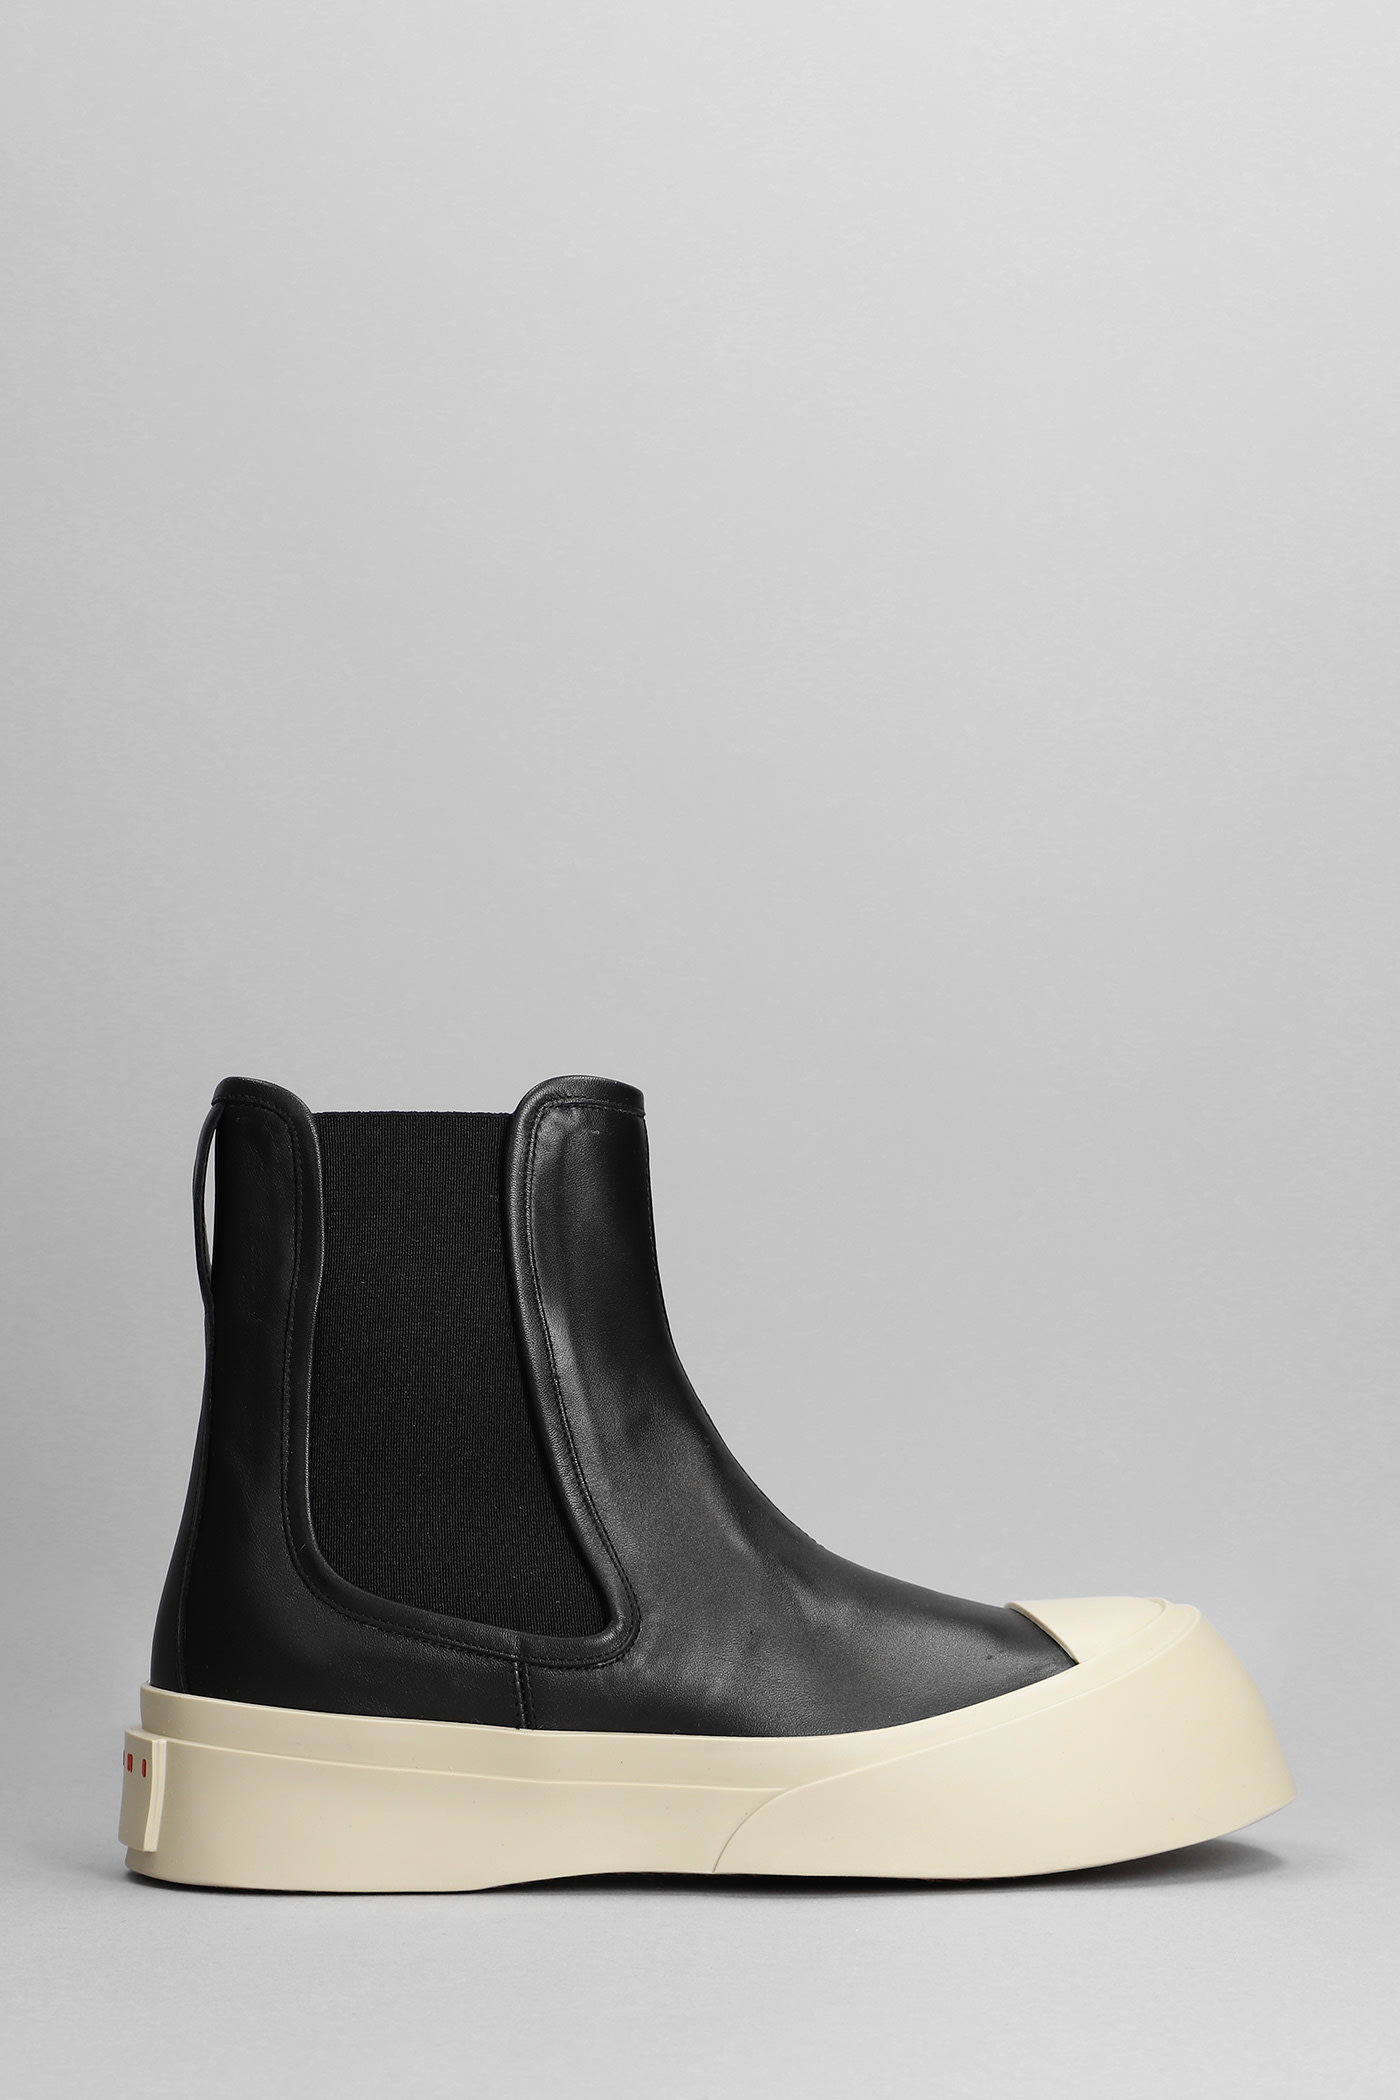 Marni Sneakers In Black Leather